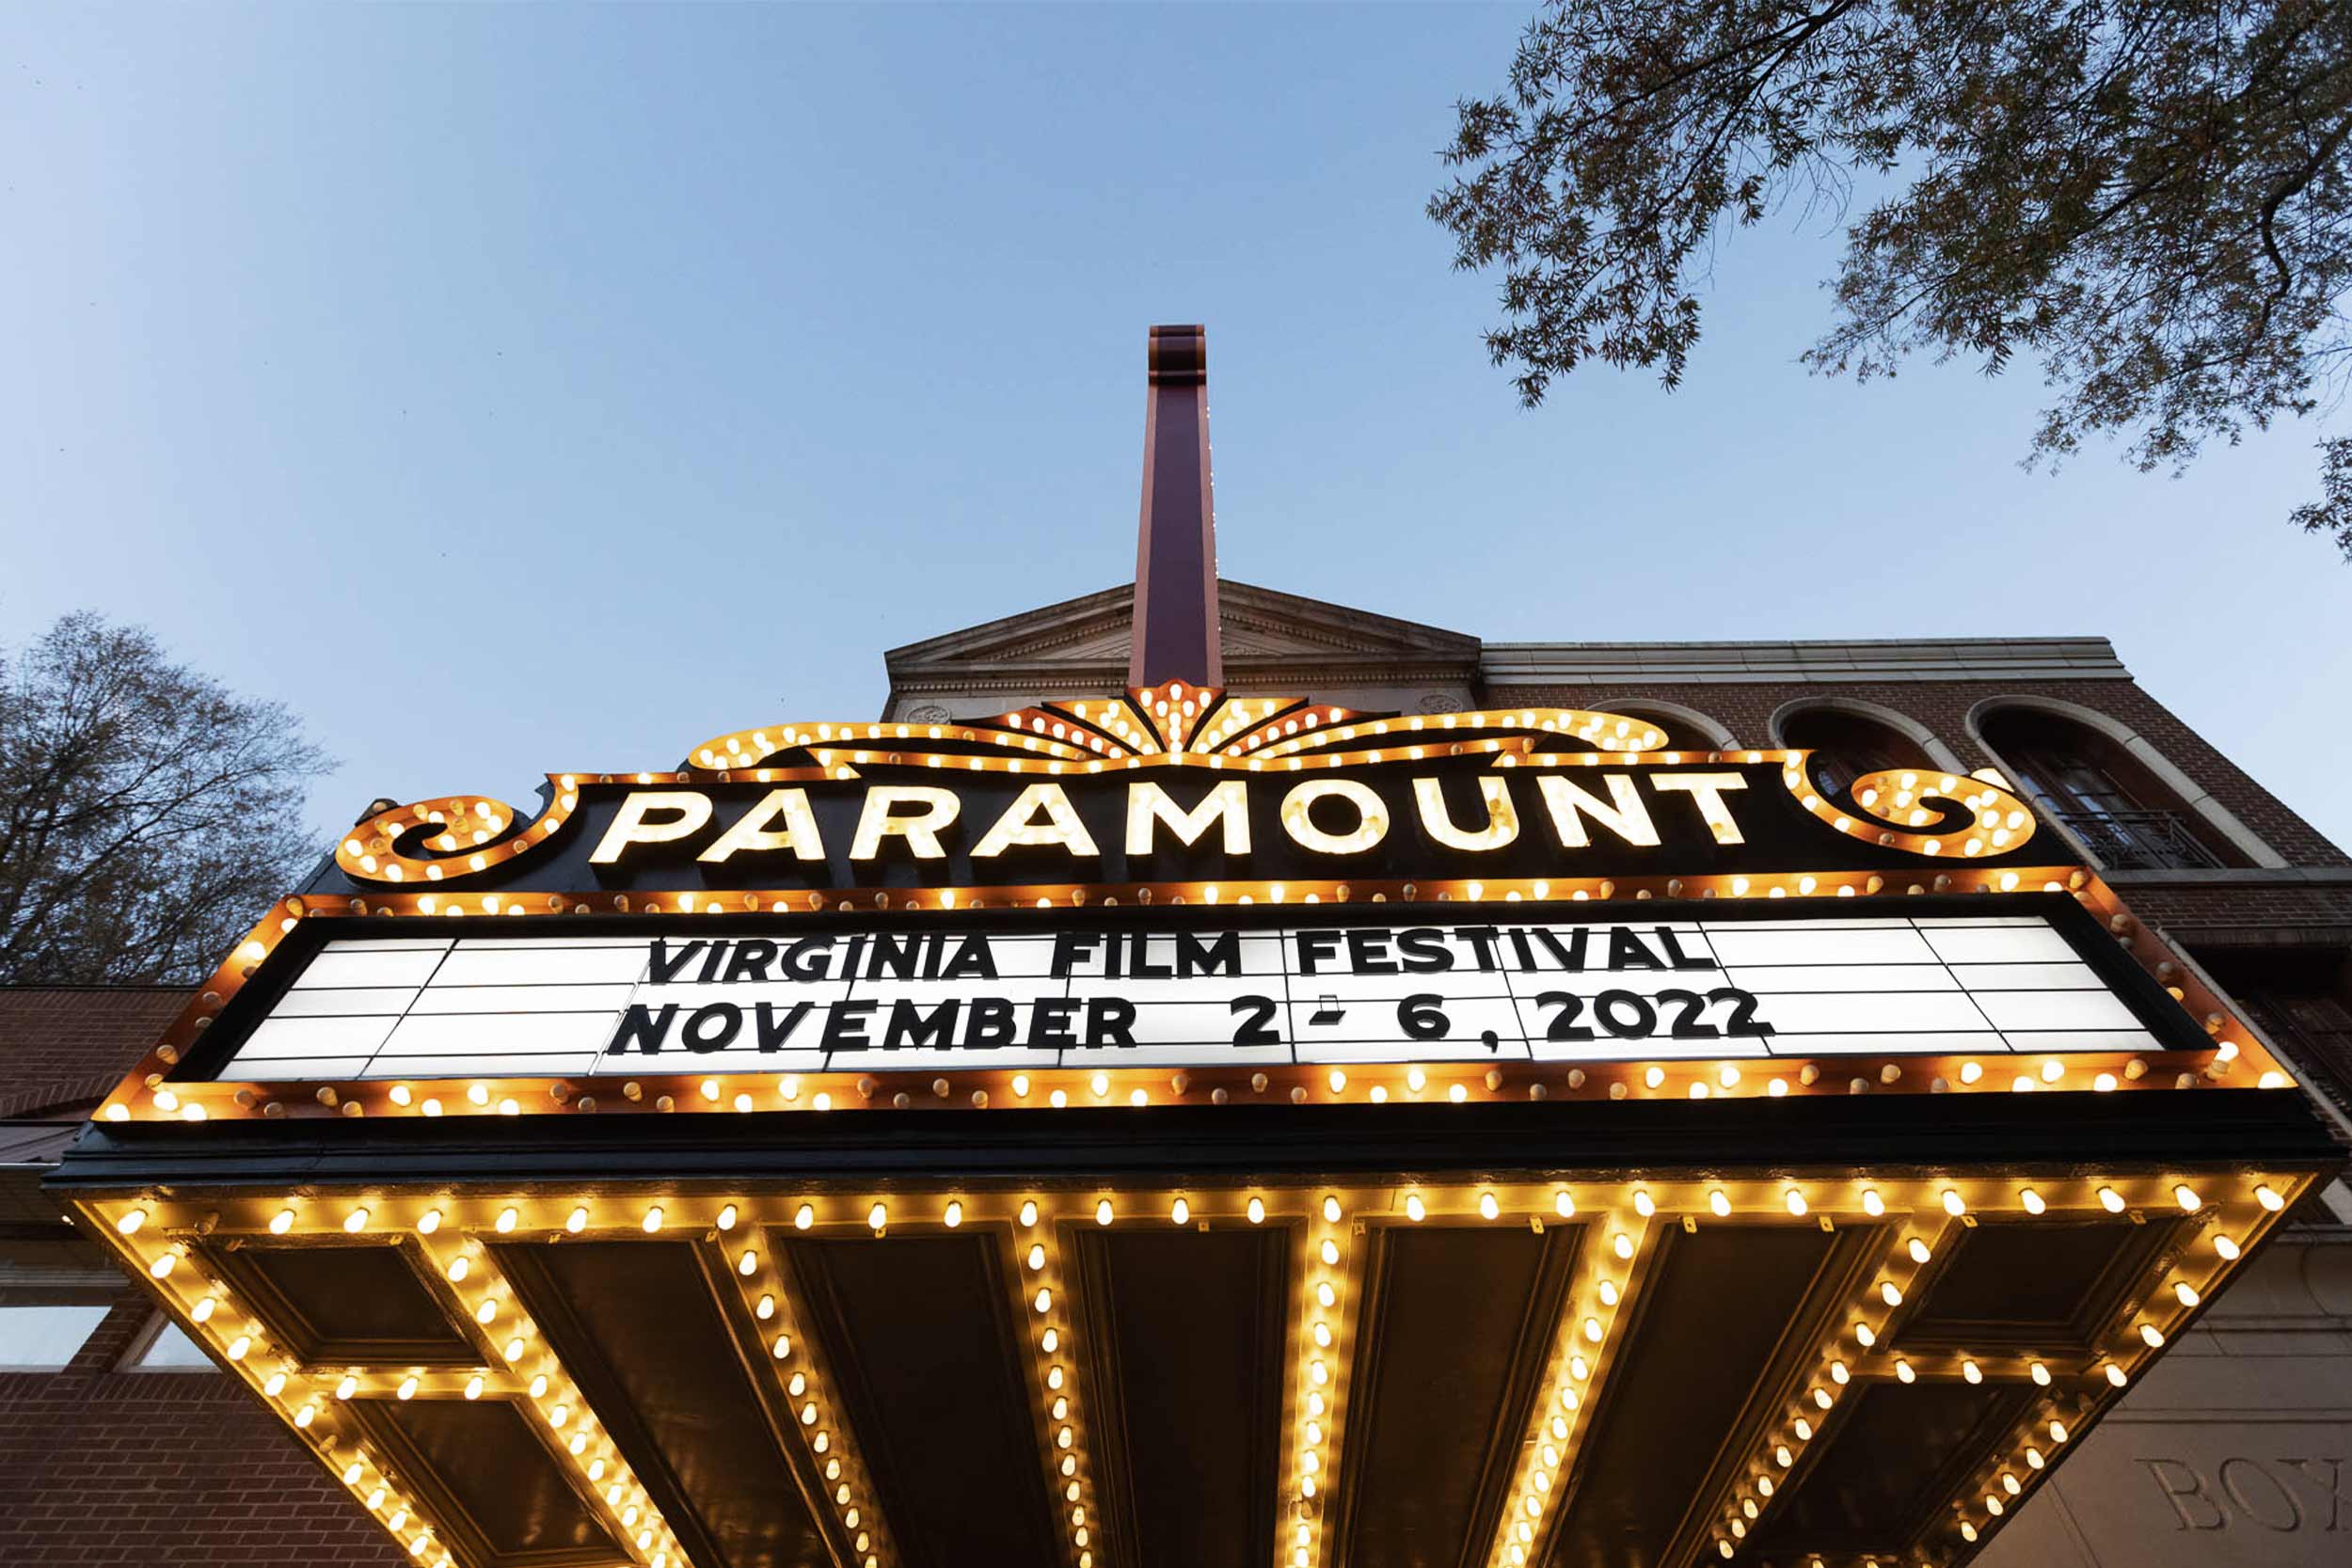 An image of the Paramount theatre